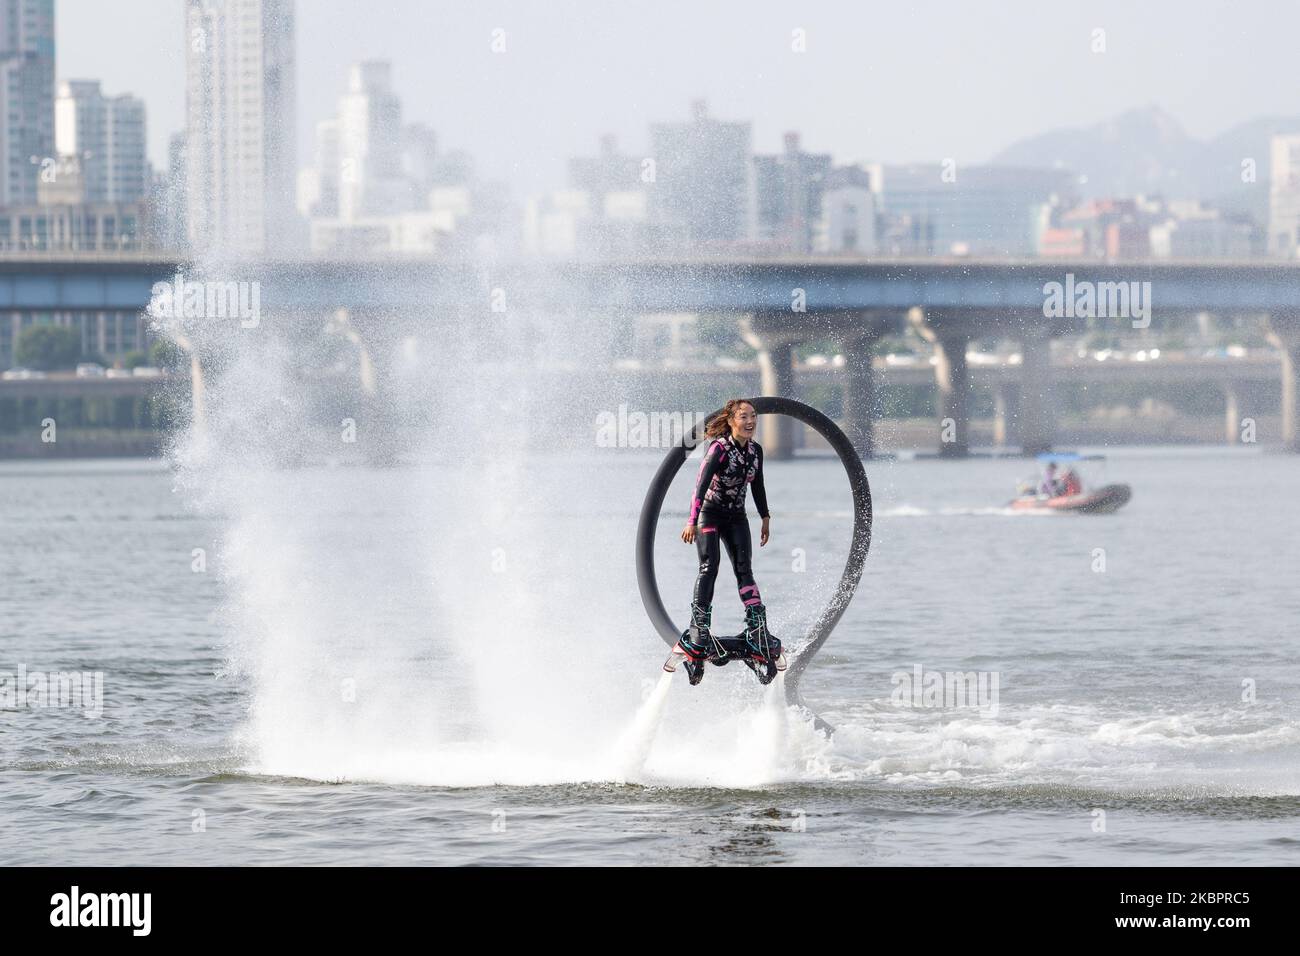 Flyboarding World Champion Park Jin-min gives a demonstration on Yeouido Hangang River Park on June 05, 2020 in Seoul, South Korea. since 2011 flyboarding is a new extreme watersport allowing the pilot to fly high above the water. This is made possible by a water propulsion system that is attached with a tube to the feet and connected to a water scooter with a high pressure water pump on a board. (Photo by Chris Jung/NurPhoto) Stock Photo